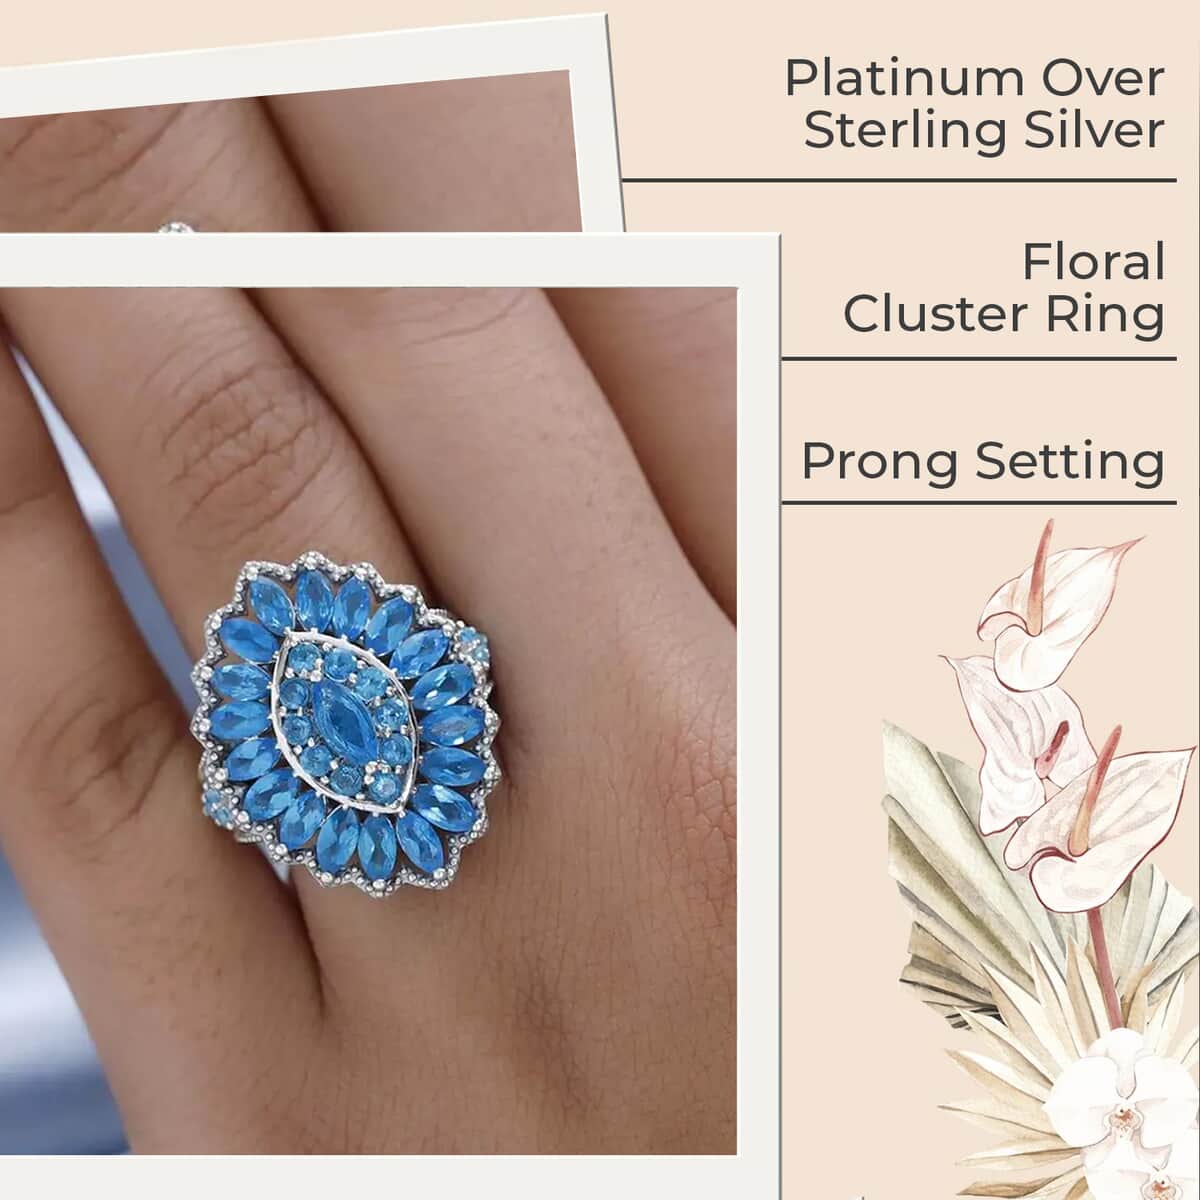 Malgache Neon Apatite 3.85 ctw Cocktail Ring, Apatite Cluster Ring, Floral Cluster Ring, Platinum Over Sterling Silver Ring (Size 9) image number 2